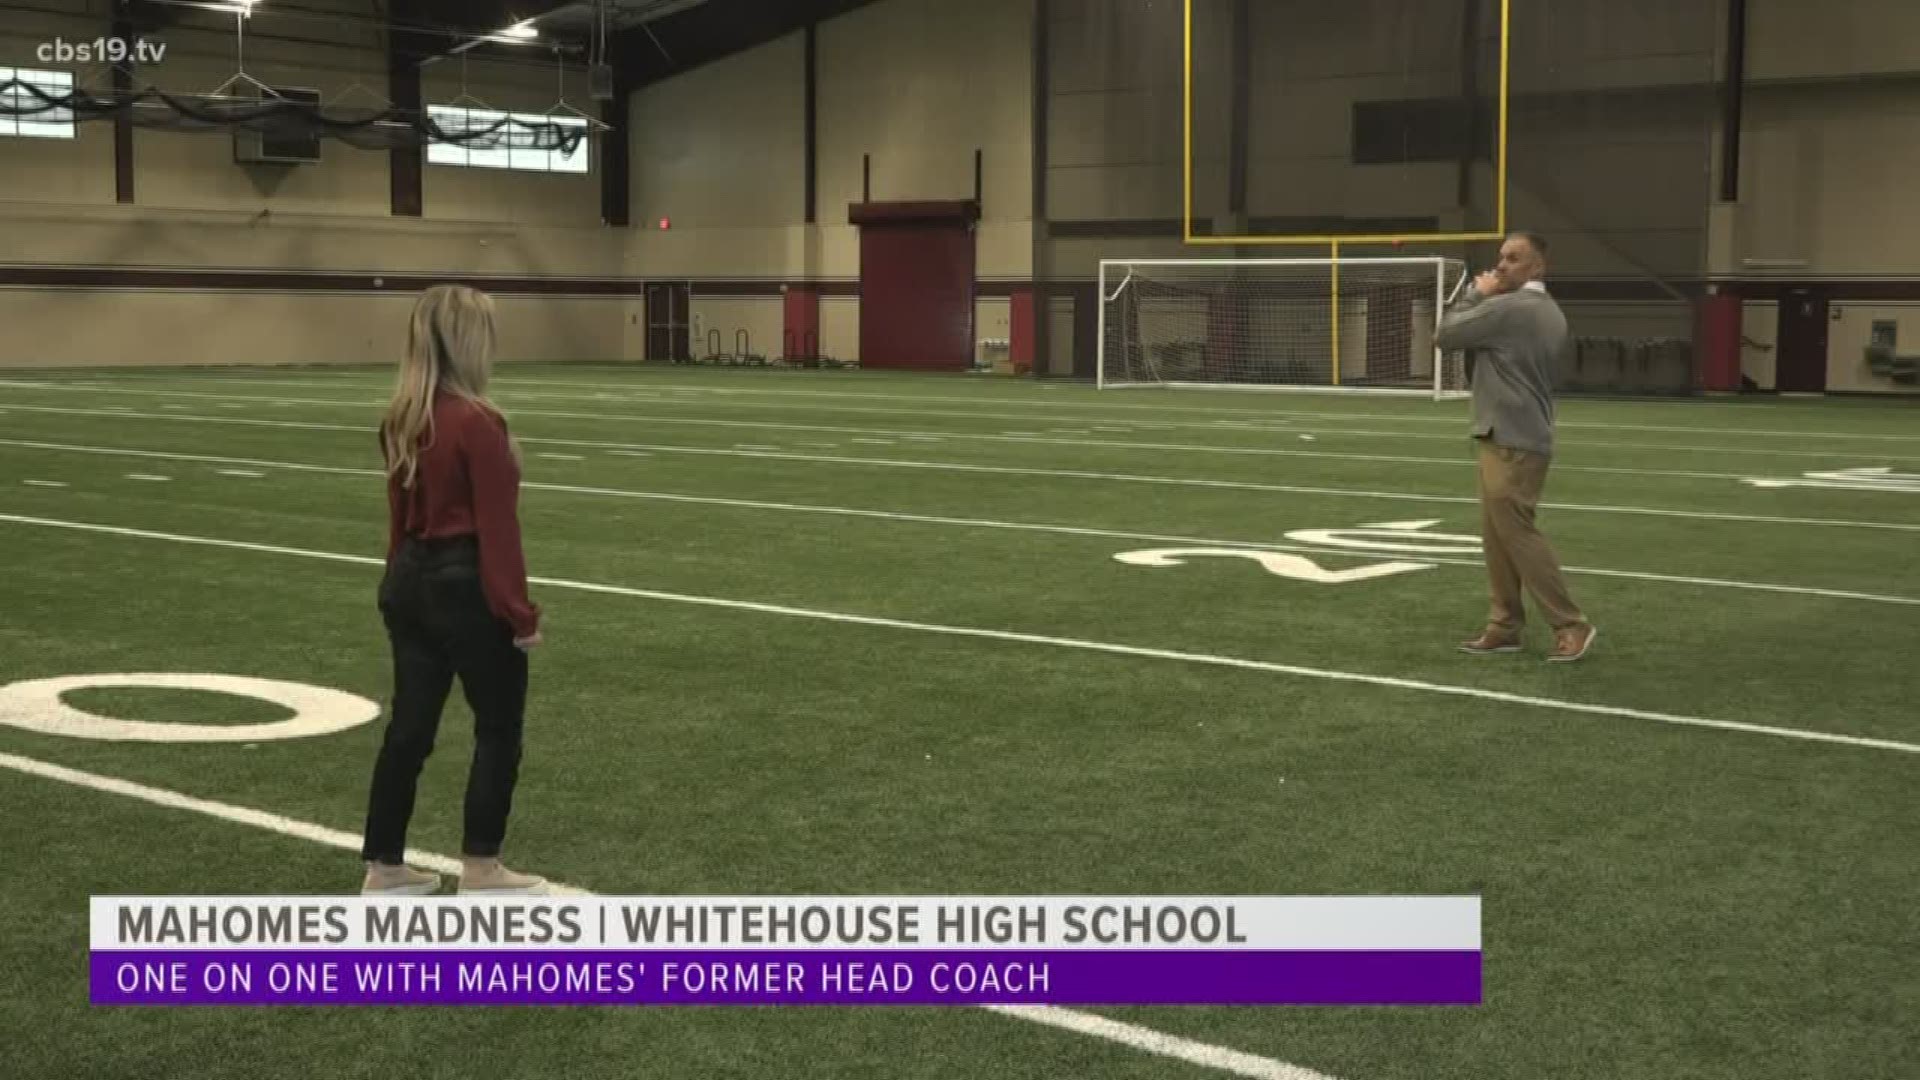 We chat with Patrick Mahomes' former coach at Whitehouse High School ahead of his first Super Bowl appearance.